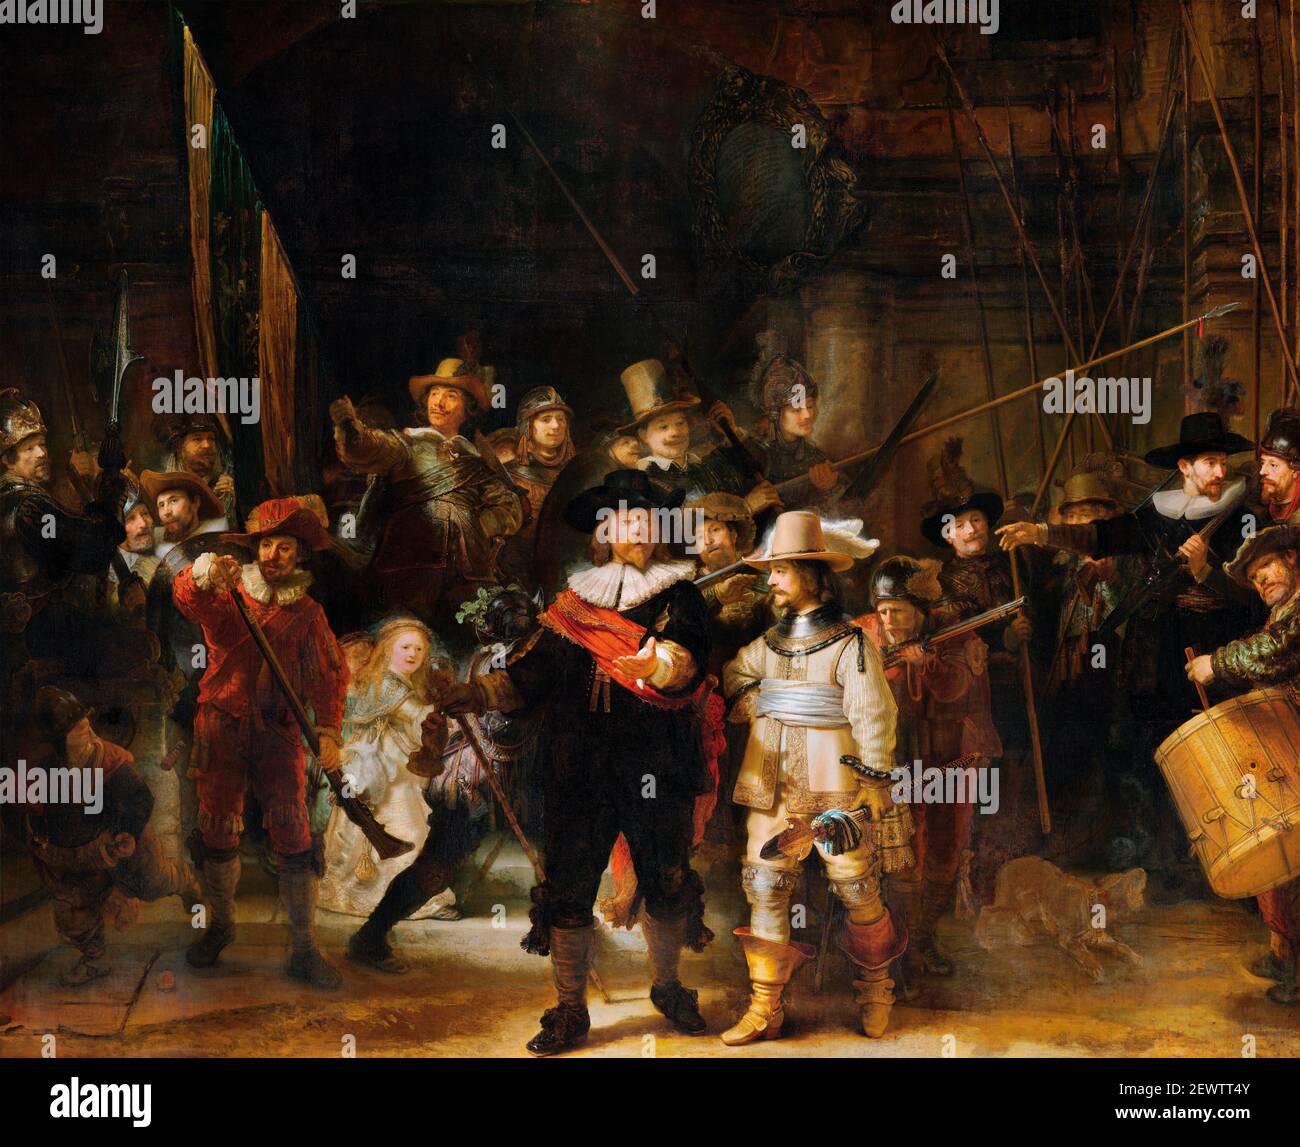 Rembrandt, Night Watch. Painting entitled The Night Watch (Militia Company of District II under the Command of Captain Frans Banninck Cocq) by Rembrandt van Rijn (1606-1669), oil on canvas, 1642. Night Watch, Rembrandt. Stock Photo